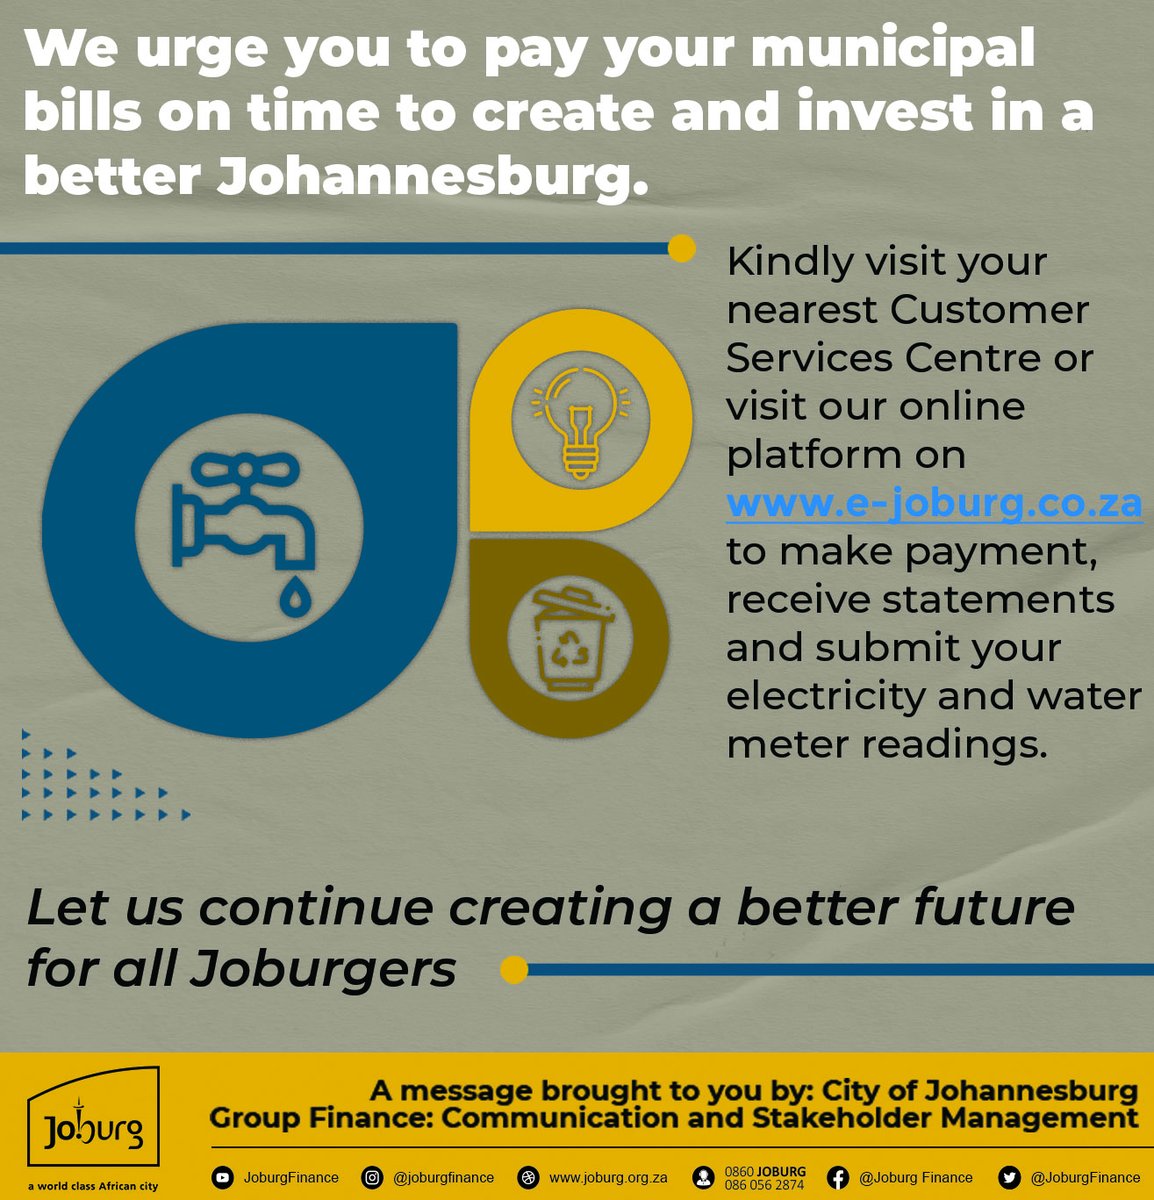 We urge you to pay your municipal bills on time to create and invest in a better Johannesburg. #JoburgCrControl #PayYourCOJBill 

Pay now online visit: e-joburg.org.za